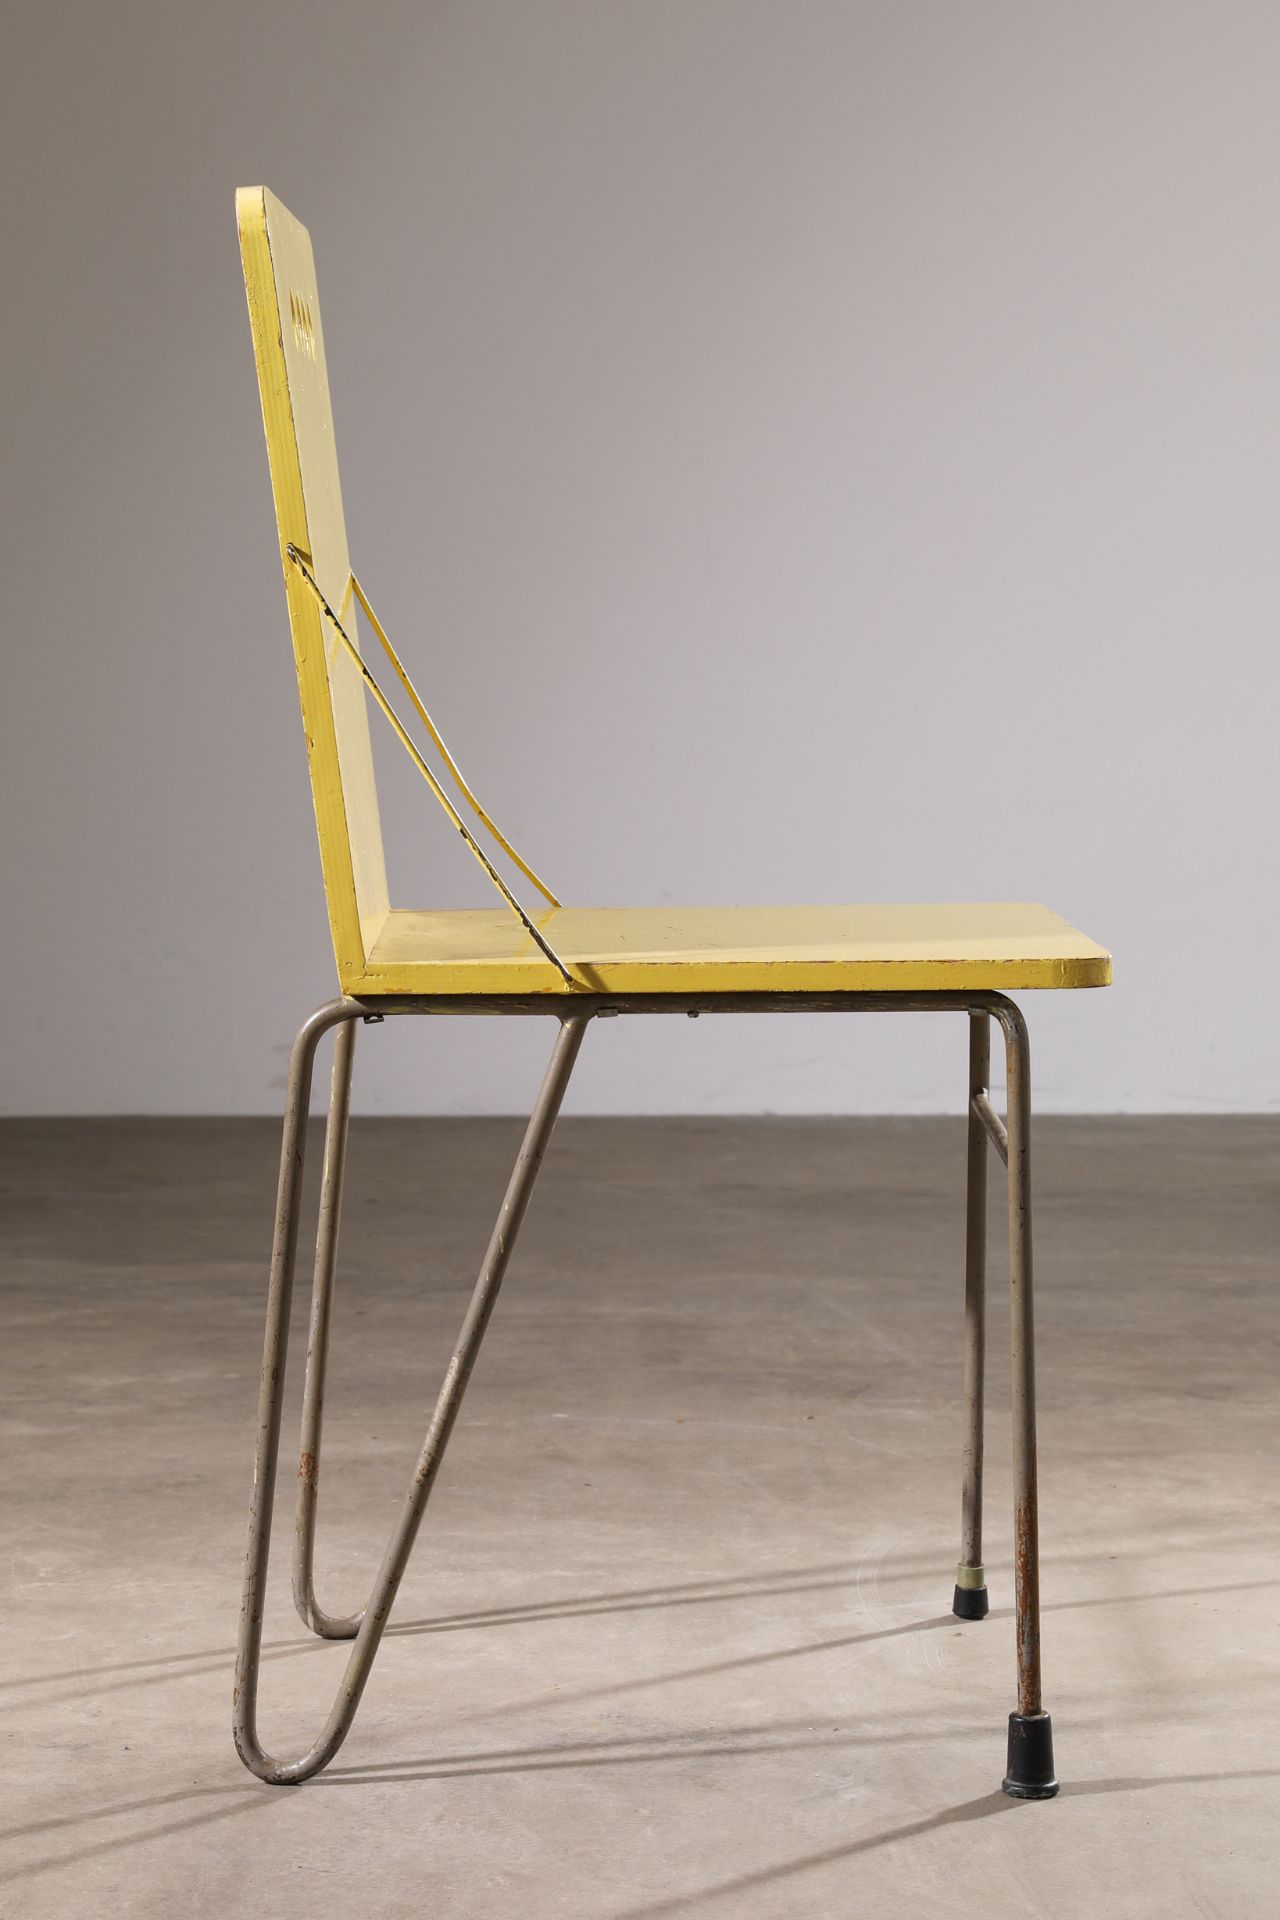 Gerrit Rietveld Jr., Chair from a self-produced small series - Image 4 of 7